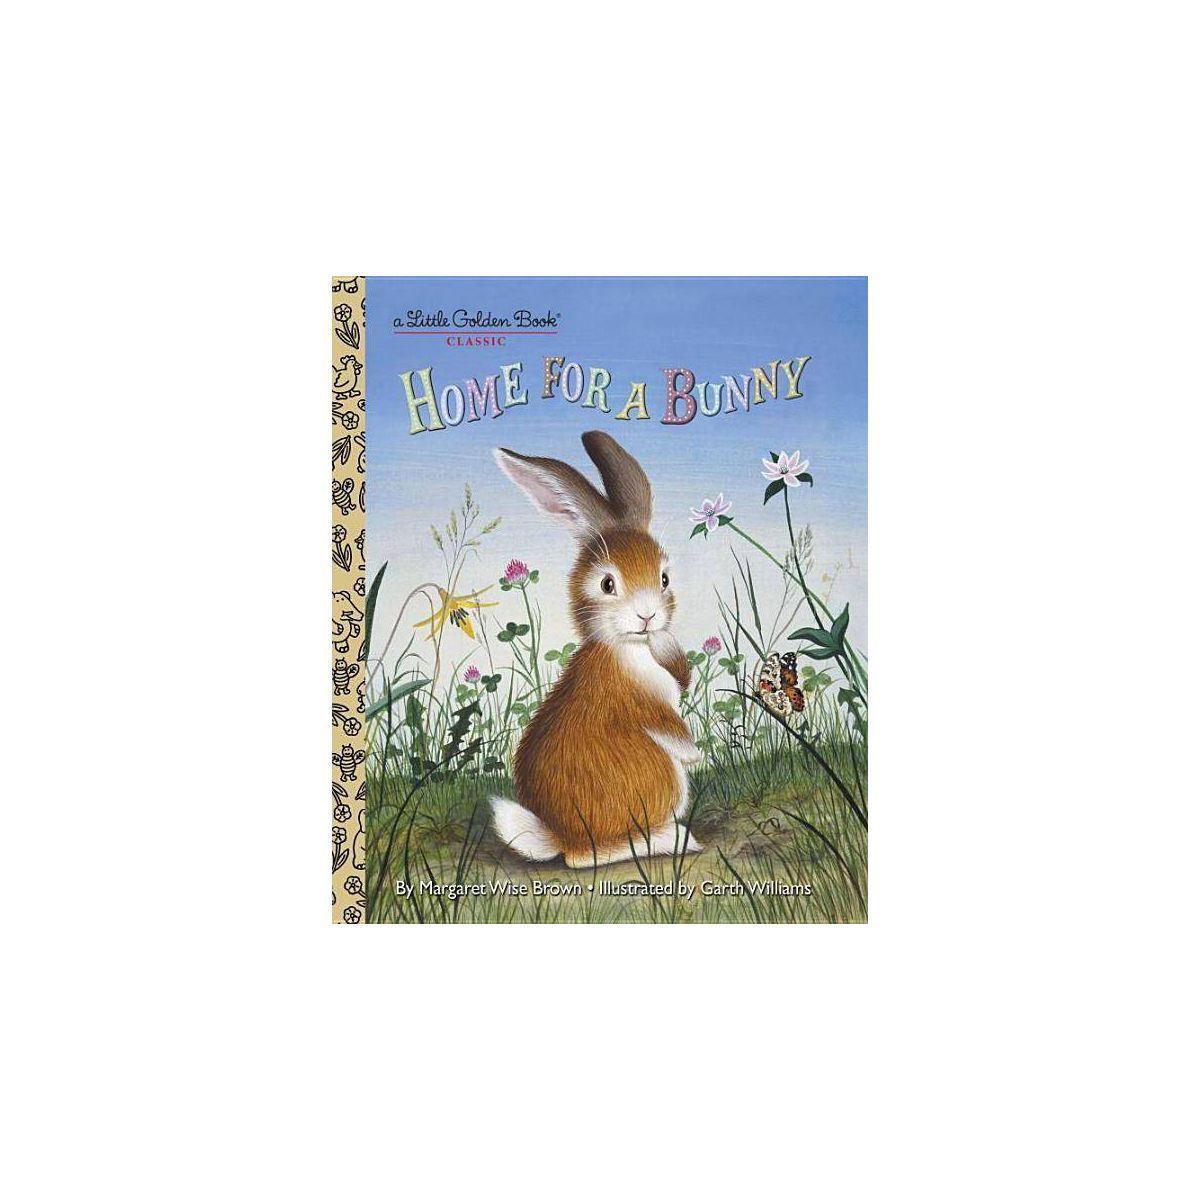 Home for a Bunny ( Little Golden Books) (Reprint) (Hardcover) by Margaret Wise Brown | Target